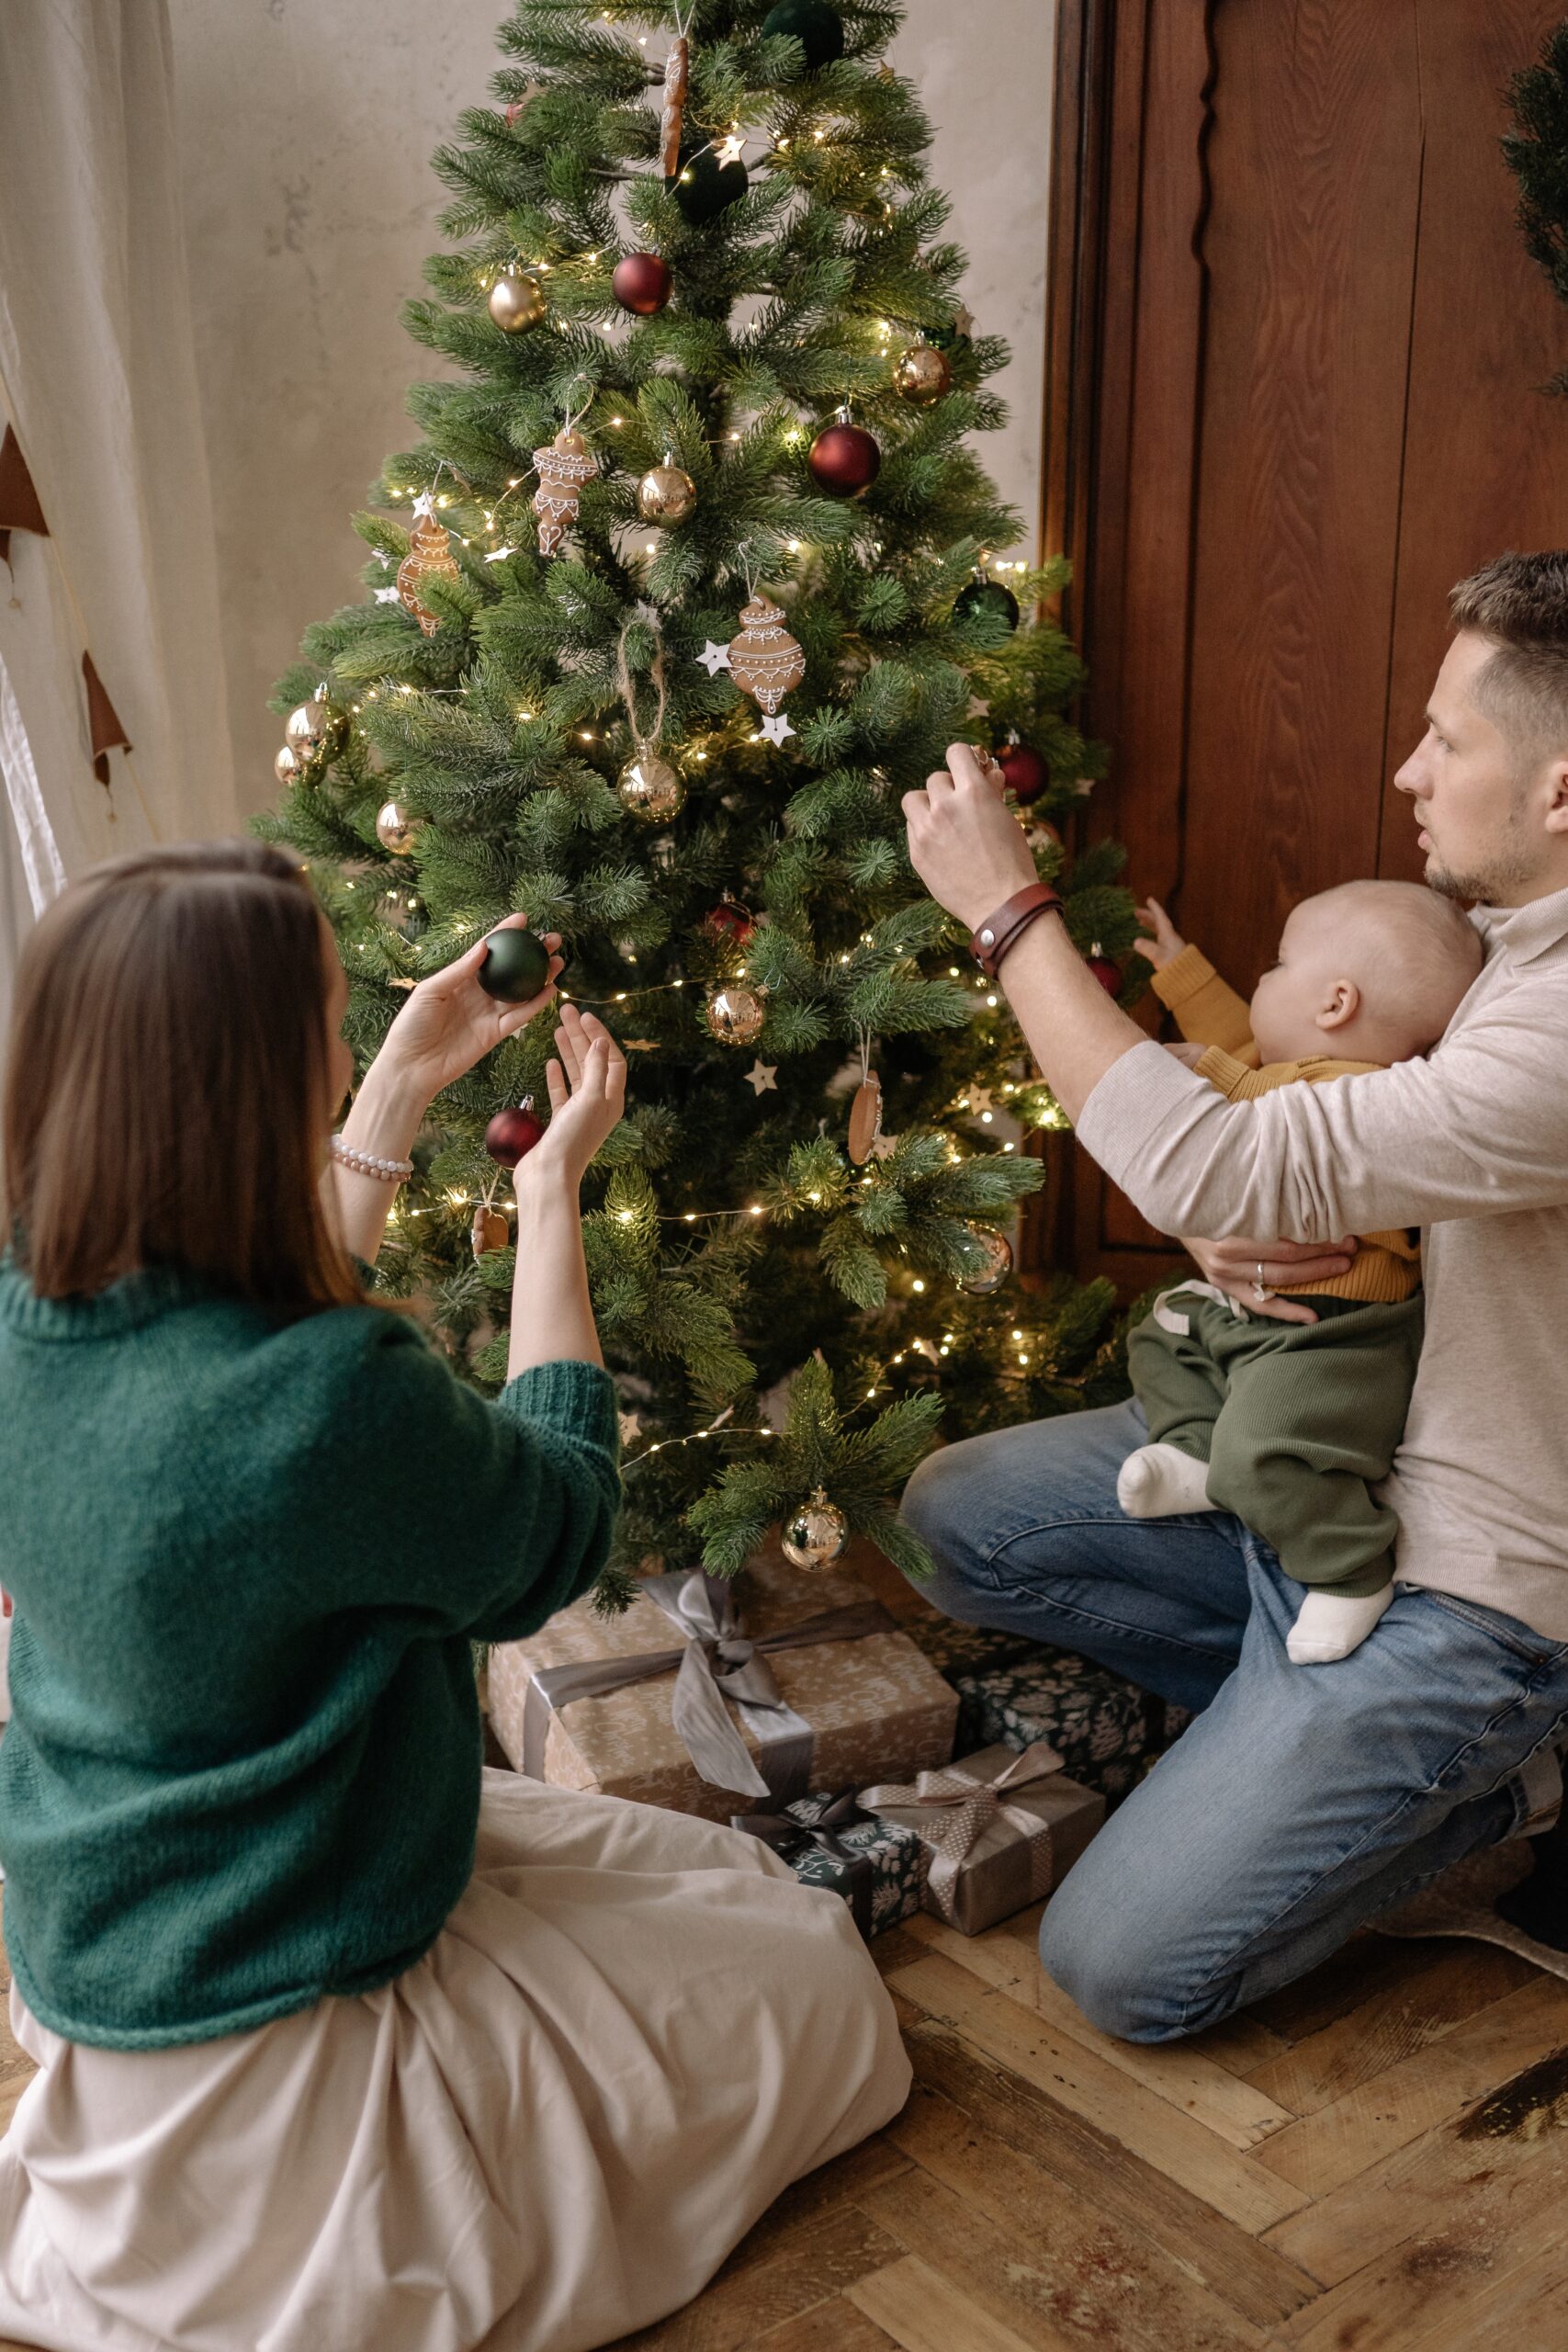 A family putting up ornaments on a Christmas tree